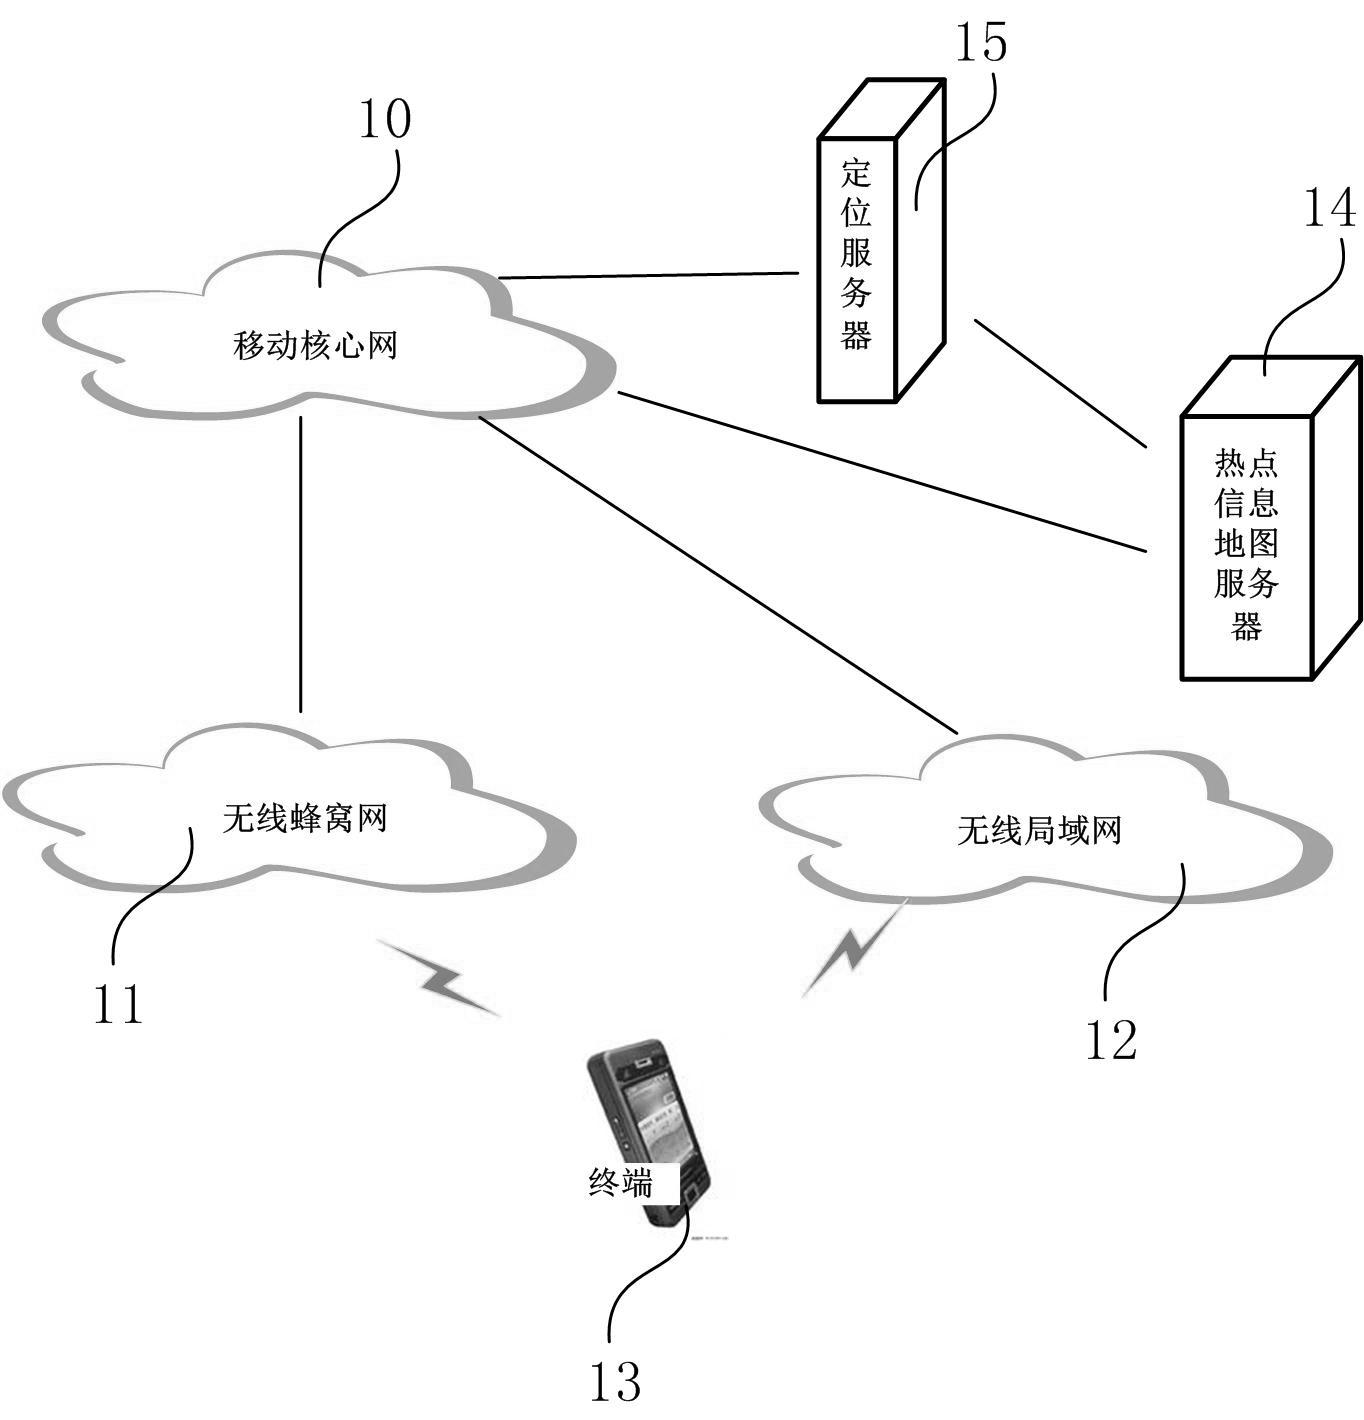 Network having wireless local area network and method for accessing terminal to wireless local area network